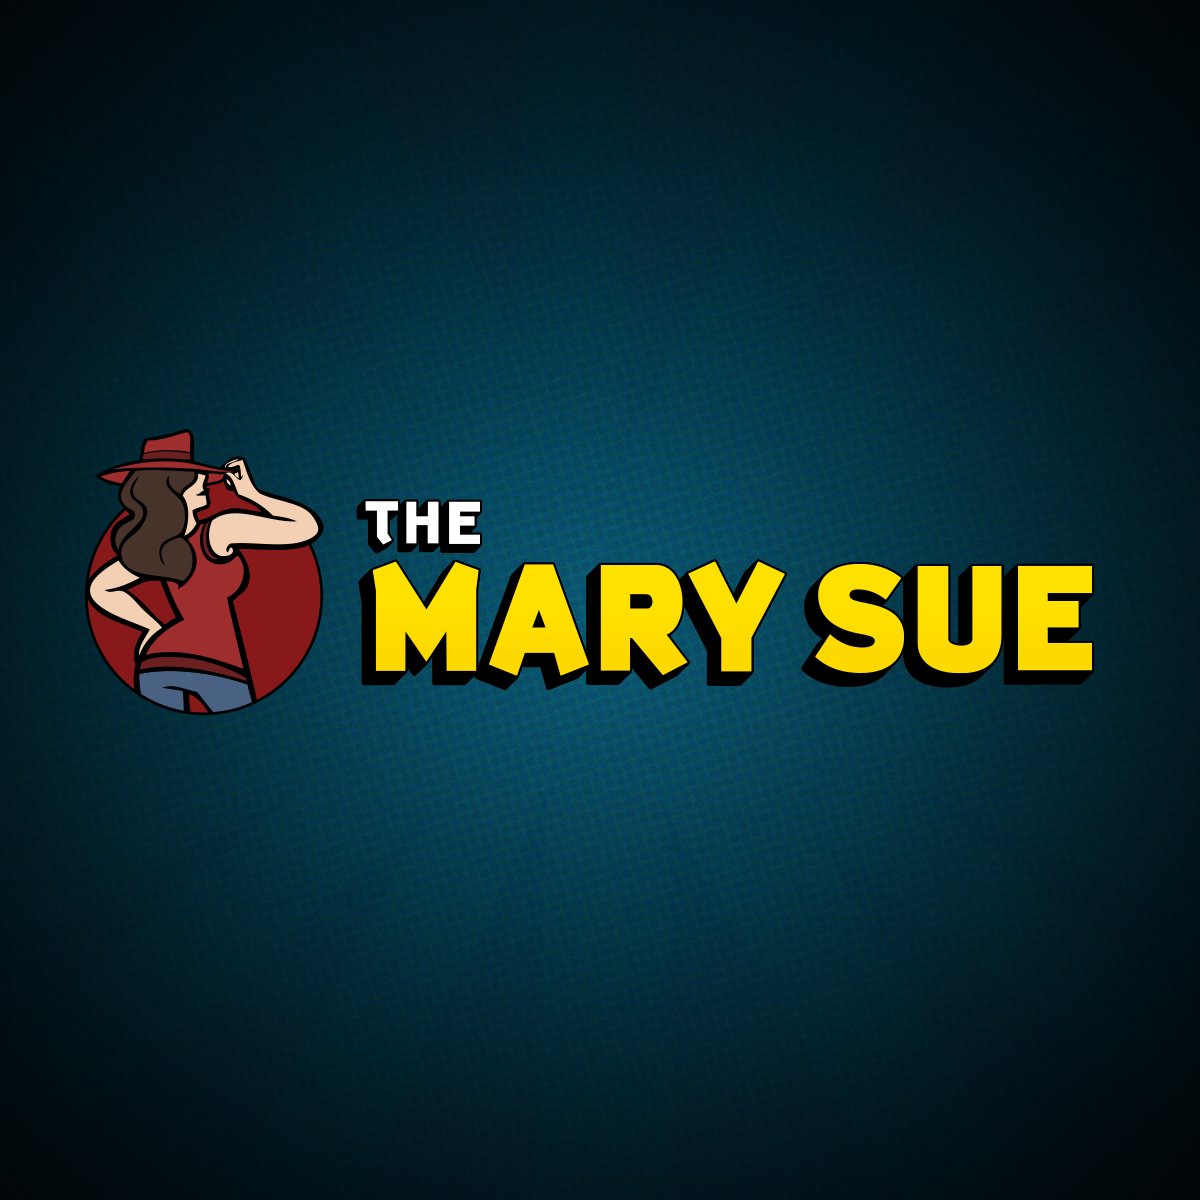 The Mary Sue title image on green background.